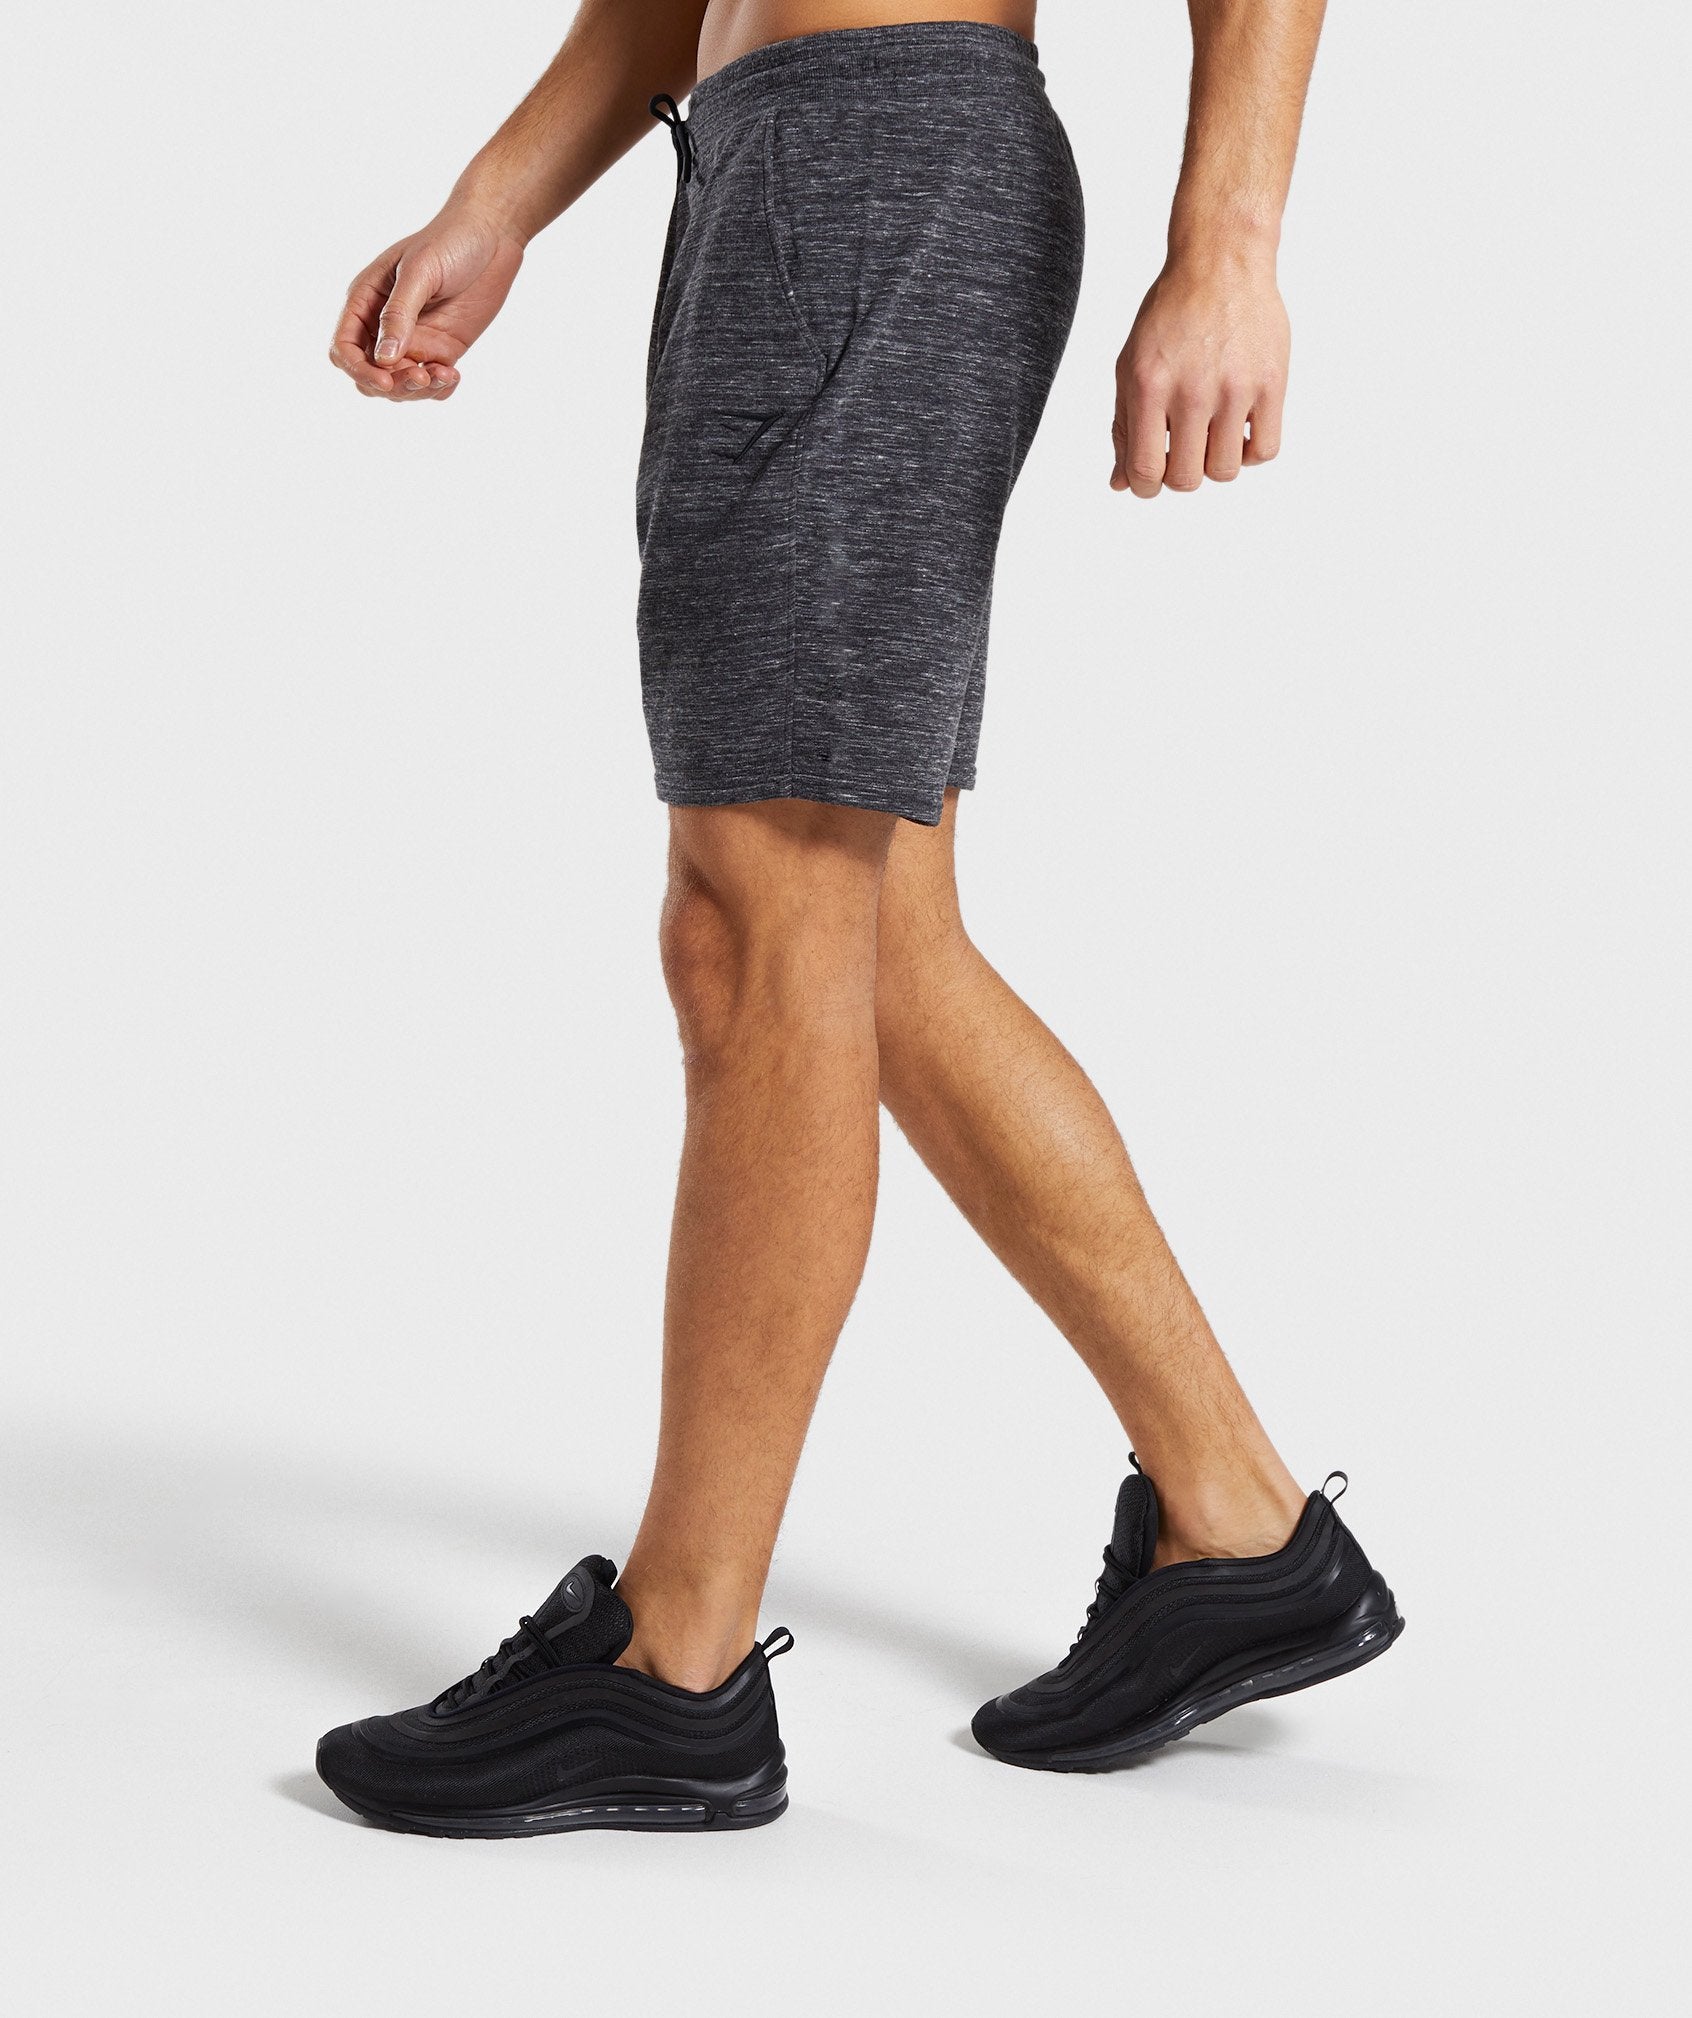 Lounge Shorts in Charcoal Marl - view 3